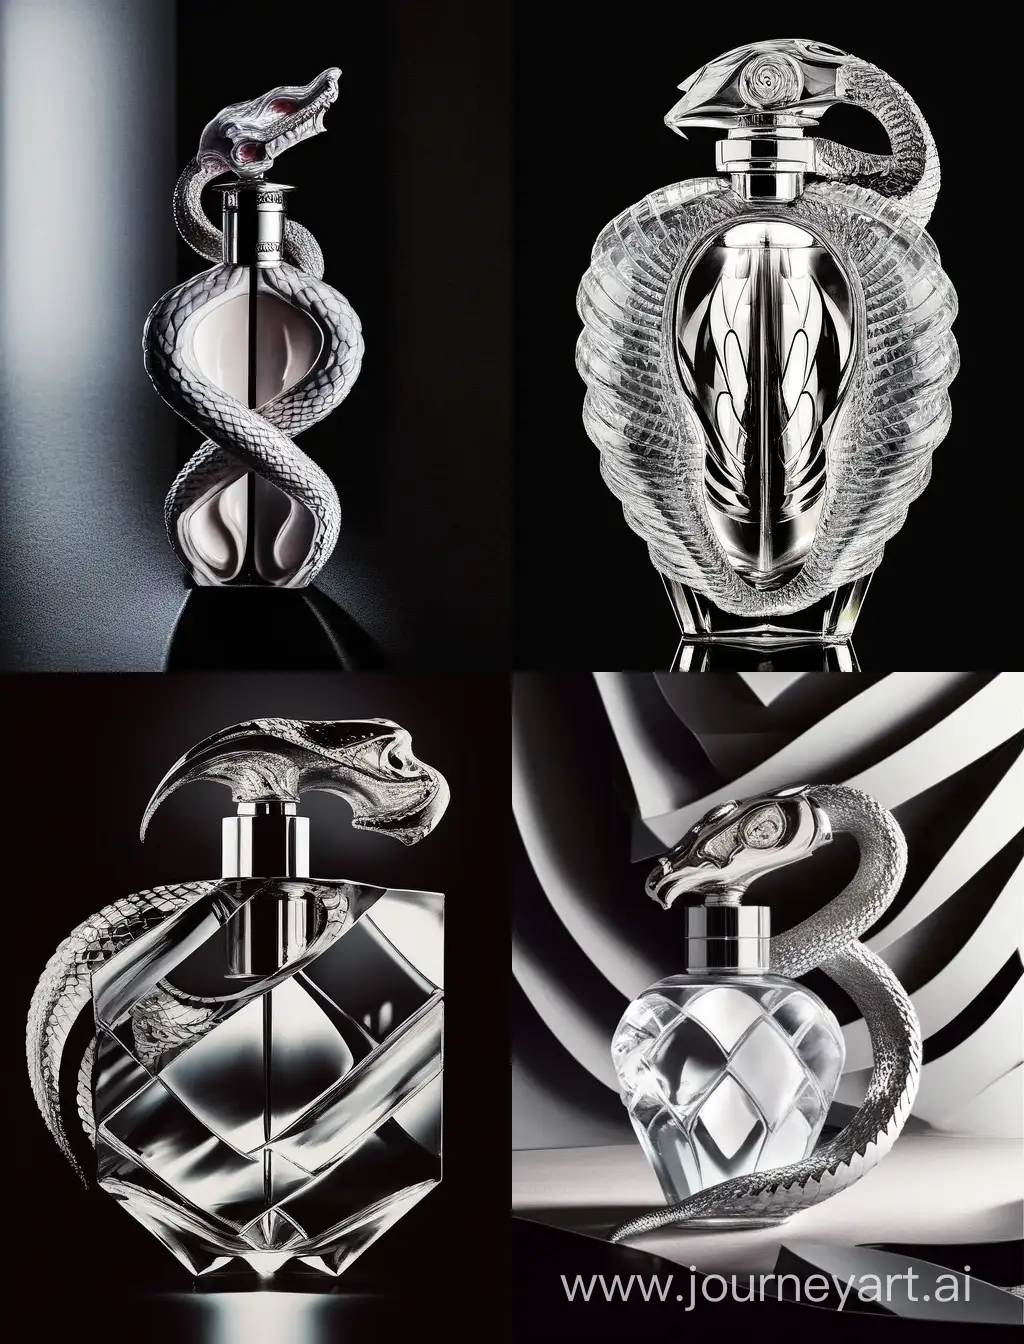 Silver-mirrored perfume. It has a shape of a snake. It’s provocative, sexy, mischievous, stunning and gorgeous. The perfume is empowering and looks expensive